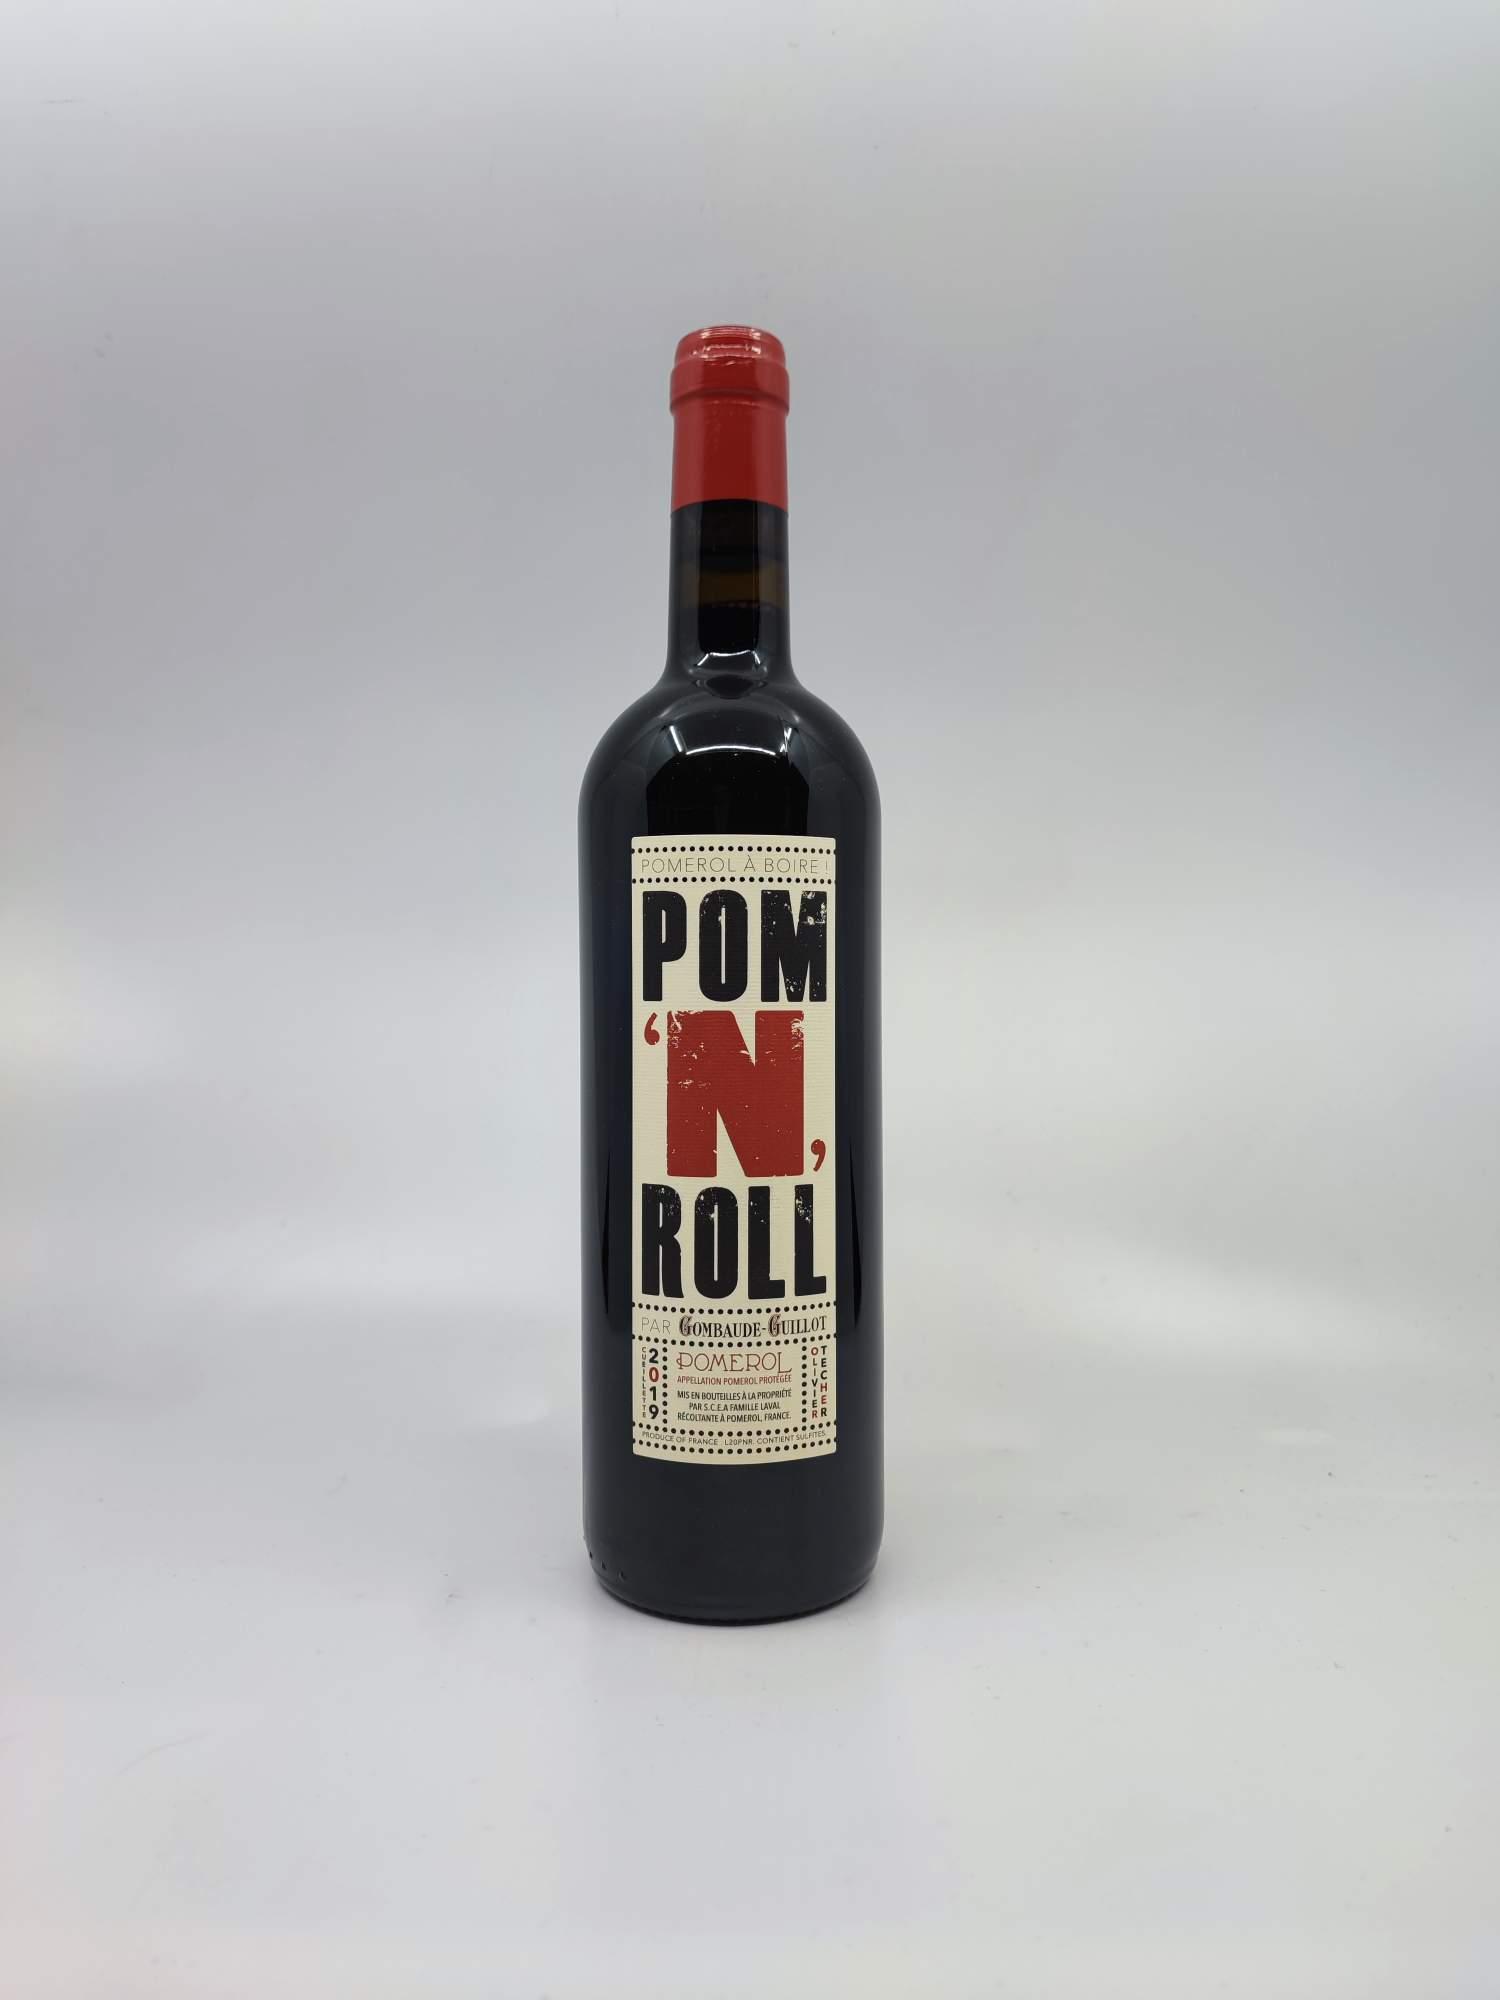 POMEROL Pom'n'roll CHATEAU GOMBAUDE GUILLOT 2019